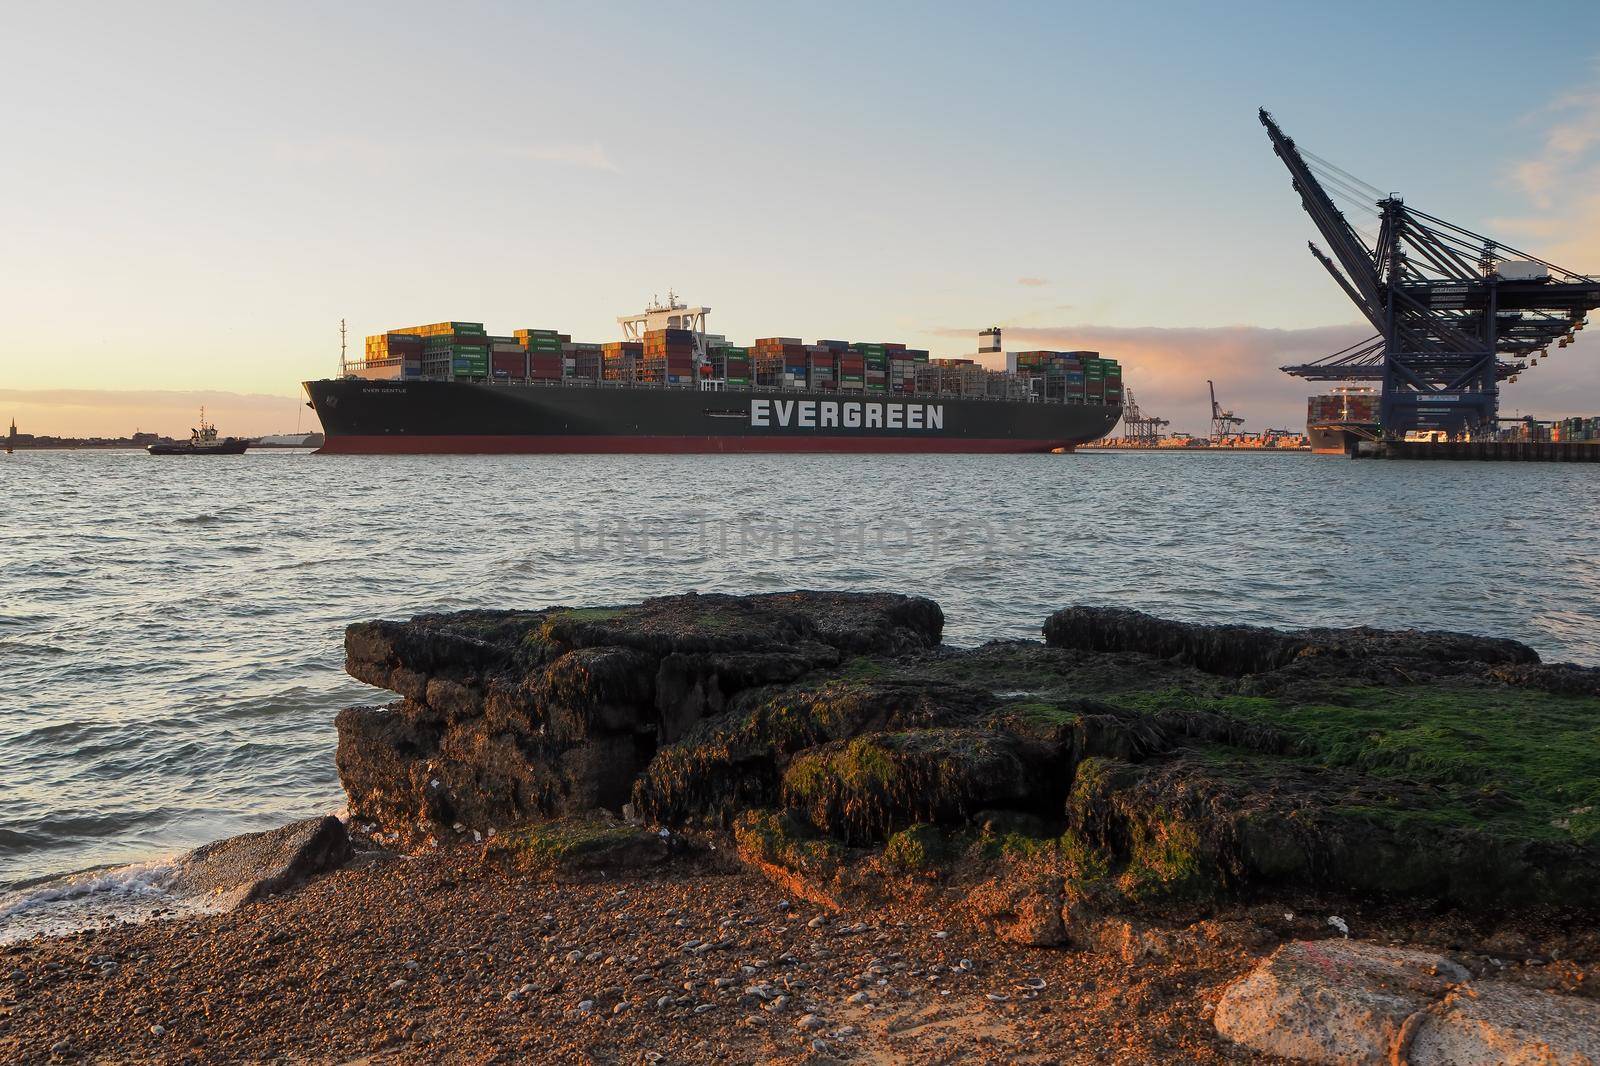 Port of Felixstowe, Suffolk, UK, March 8 2020: The container ship Ever Gentle of the Evergreen Line with tug boat in attendance and sun setting at dusk over Harwich waterfront